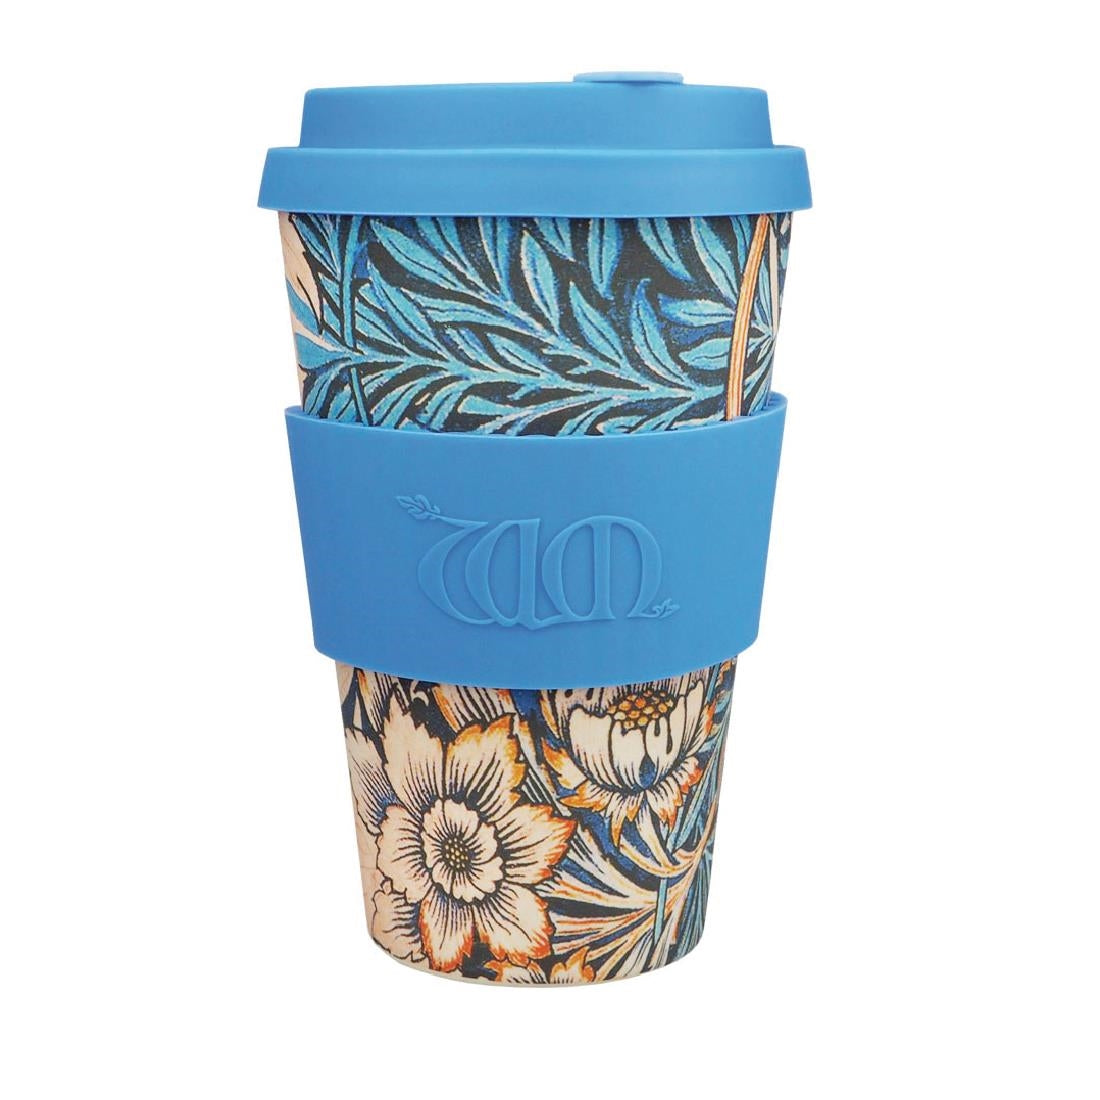 DY490 ecoffee Cup Reusable Coffee Cup William Morris Lily Design 14oz JD Catering Equipment Solutions Ltd